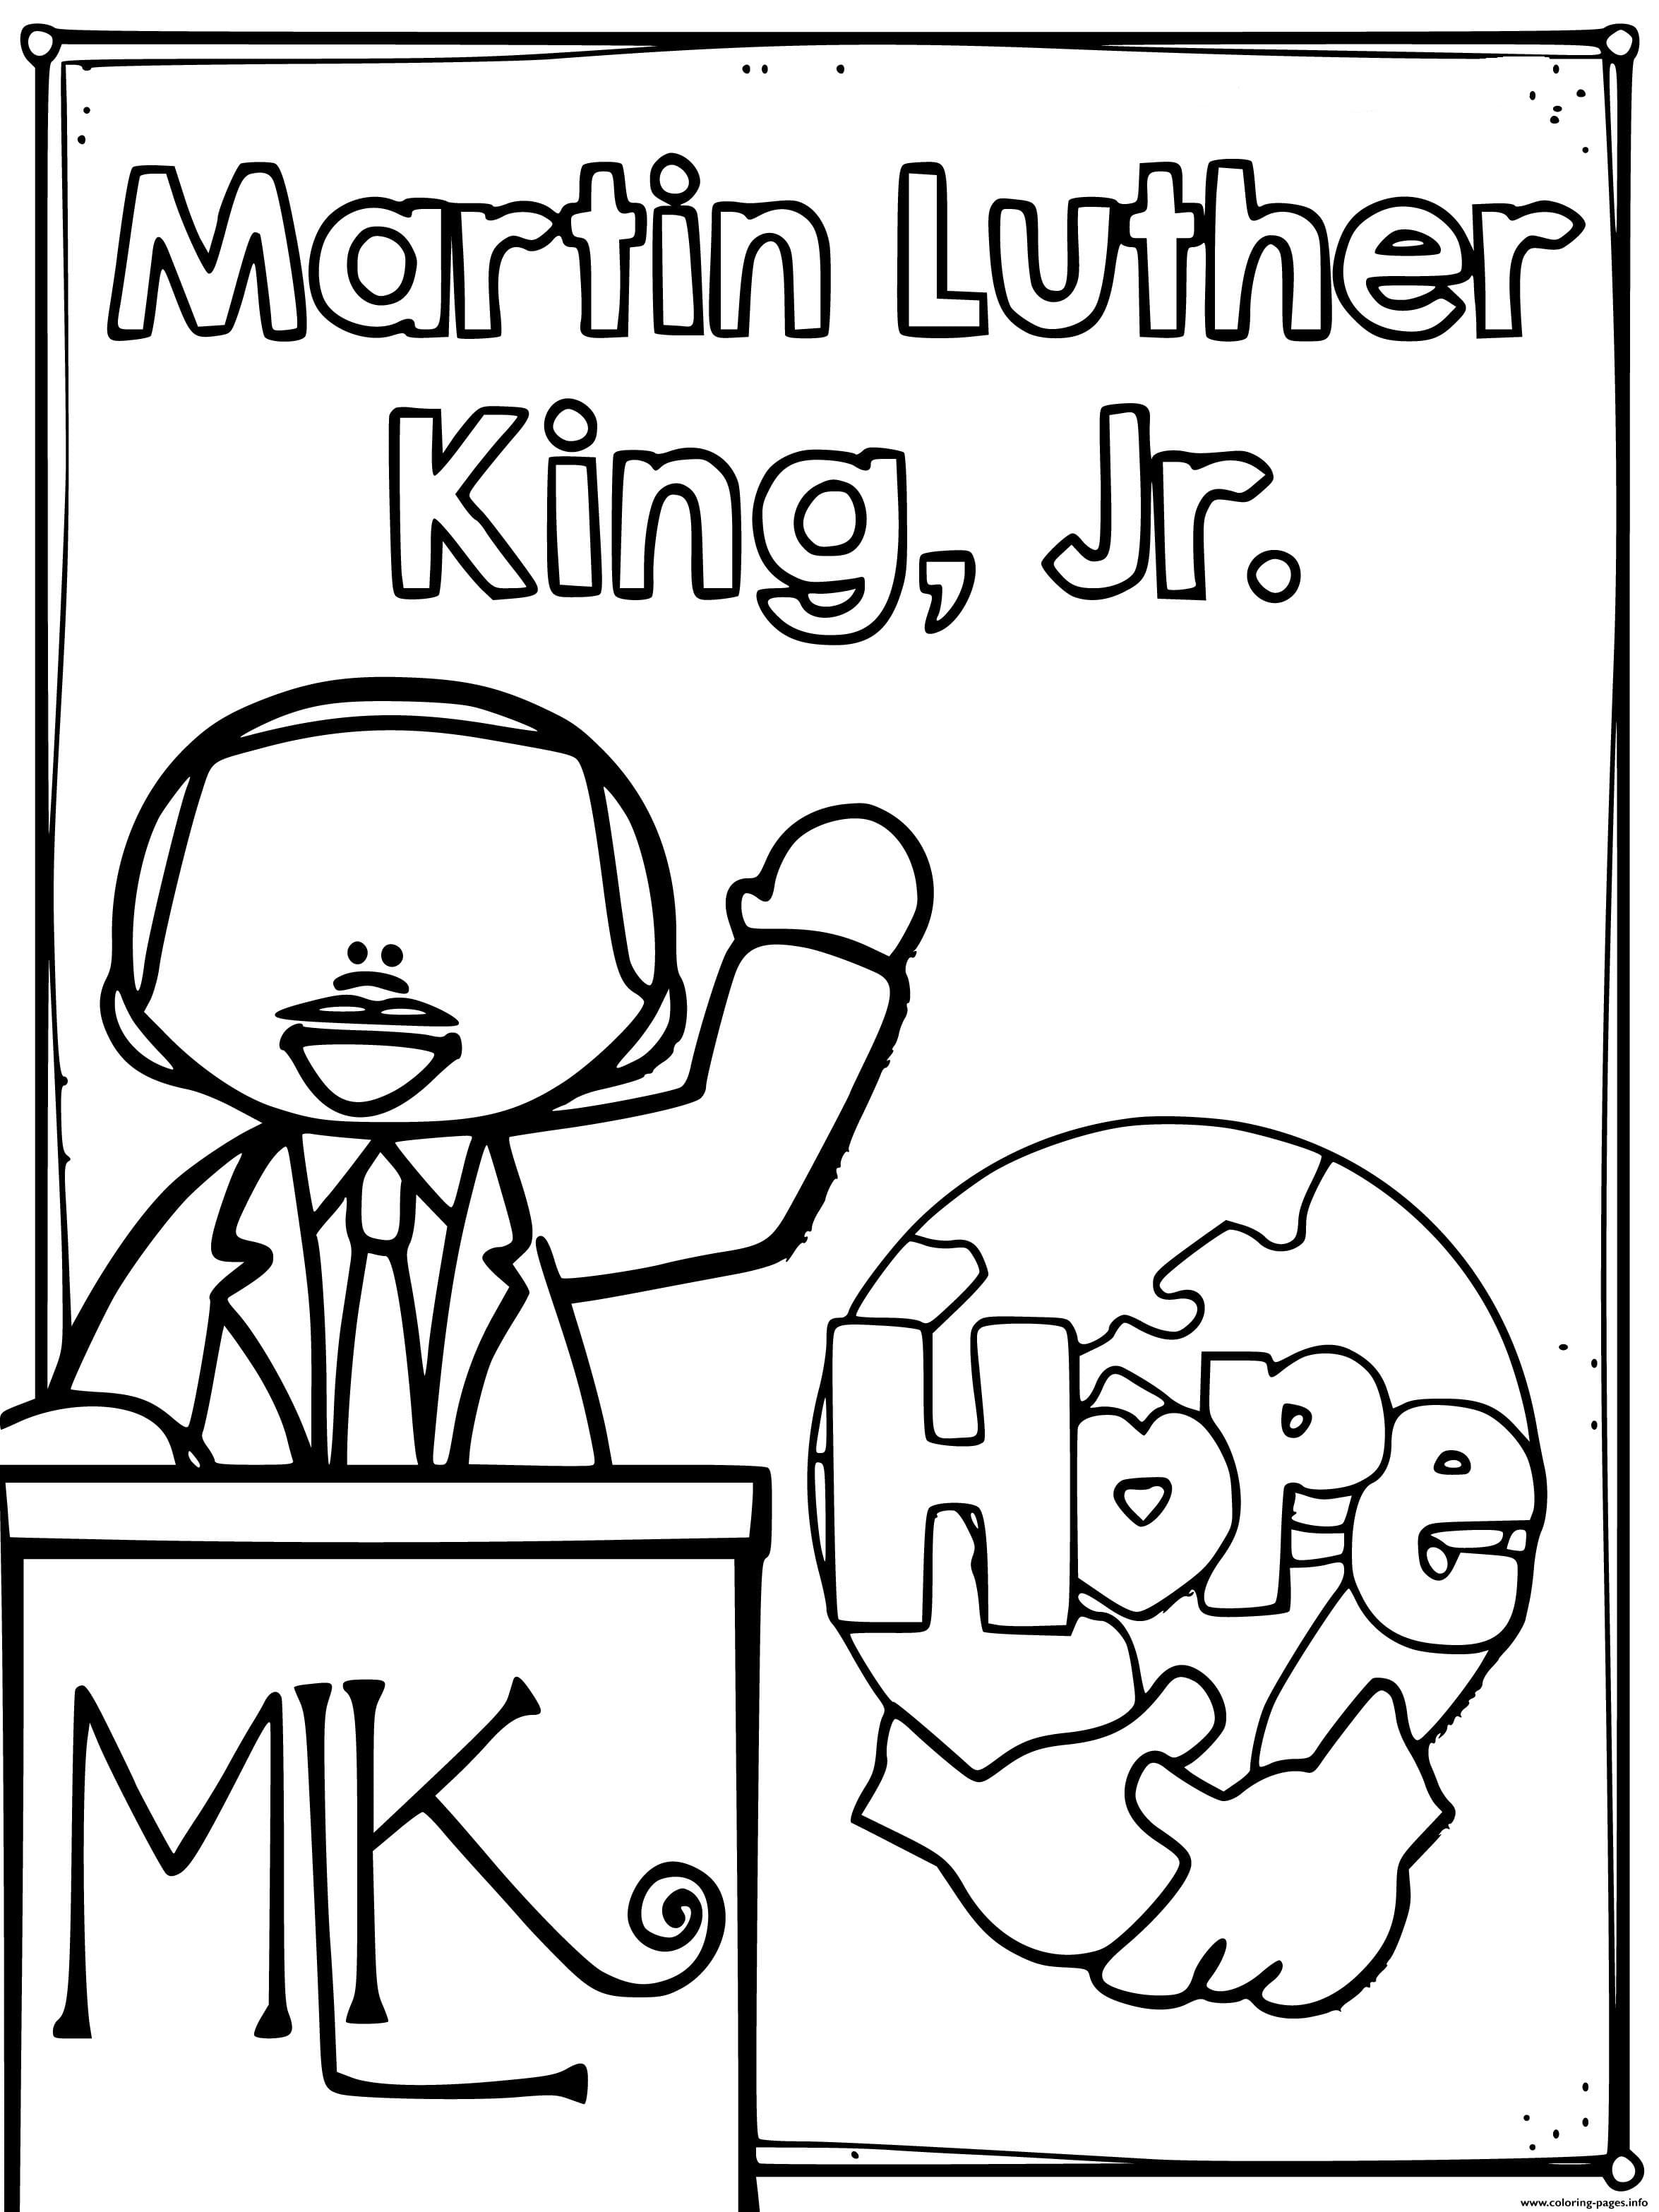 Martin Luther King, Jr. Day coloring pages. Print for free